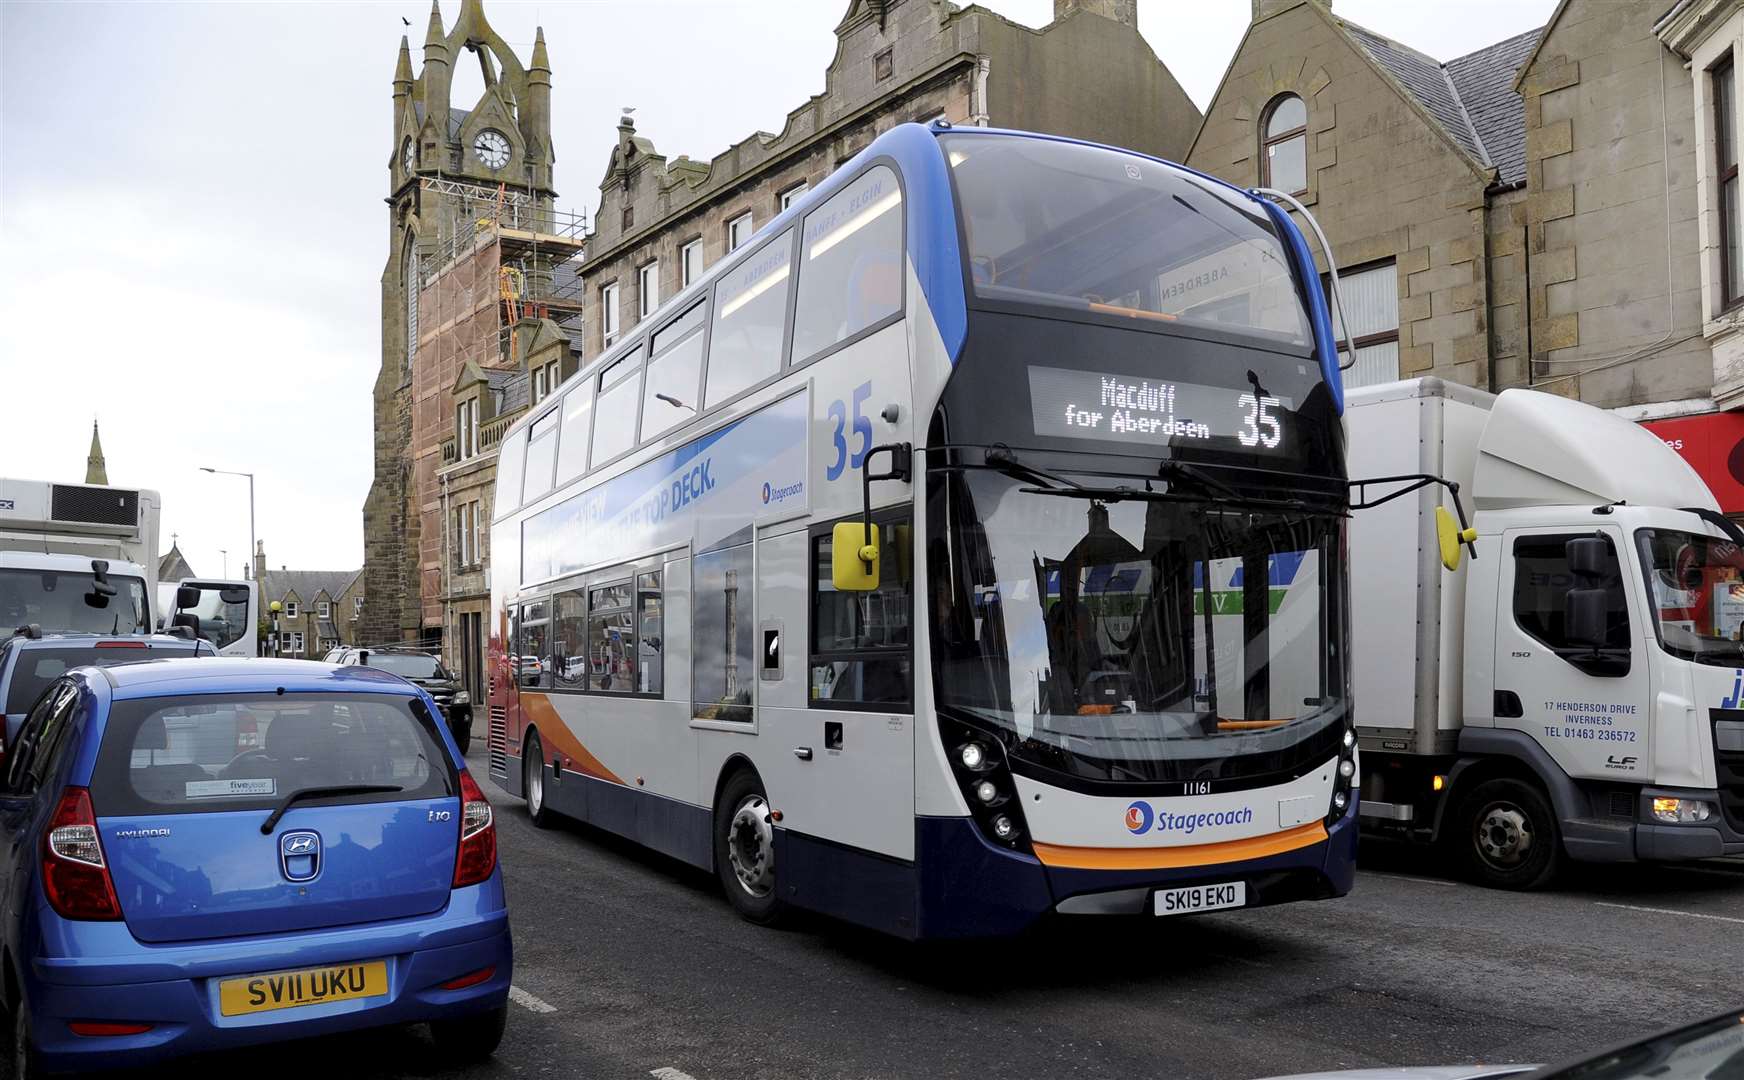 Timetables across the Stagecoach network are to be reduced for a second time from Monday.